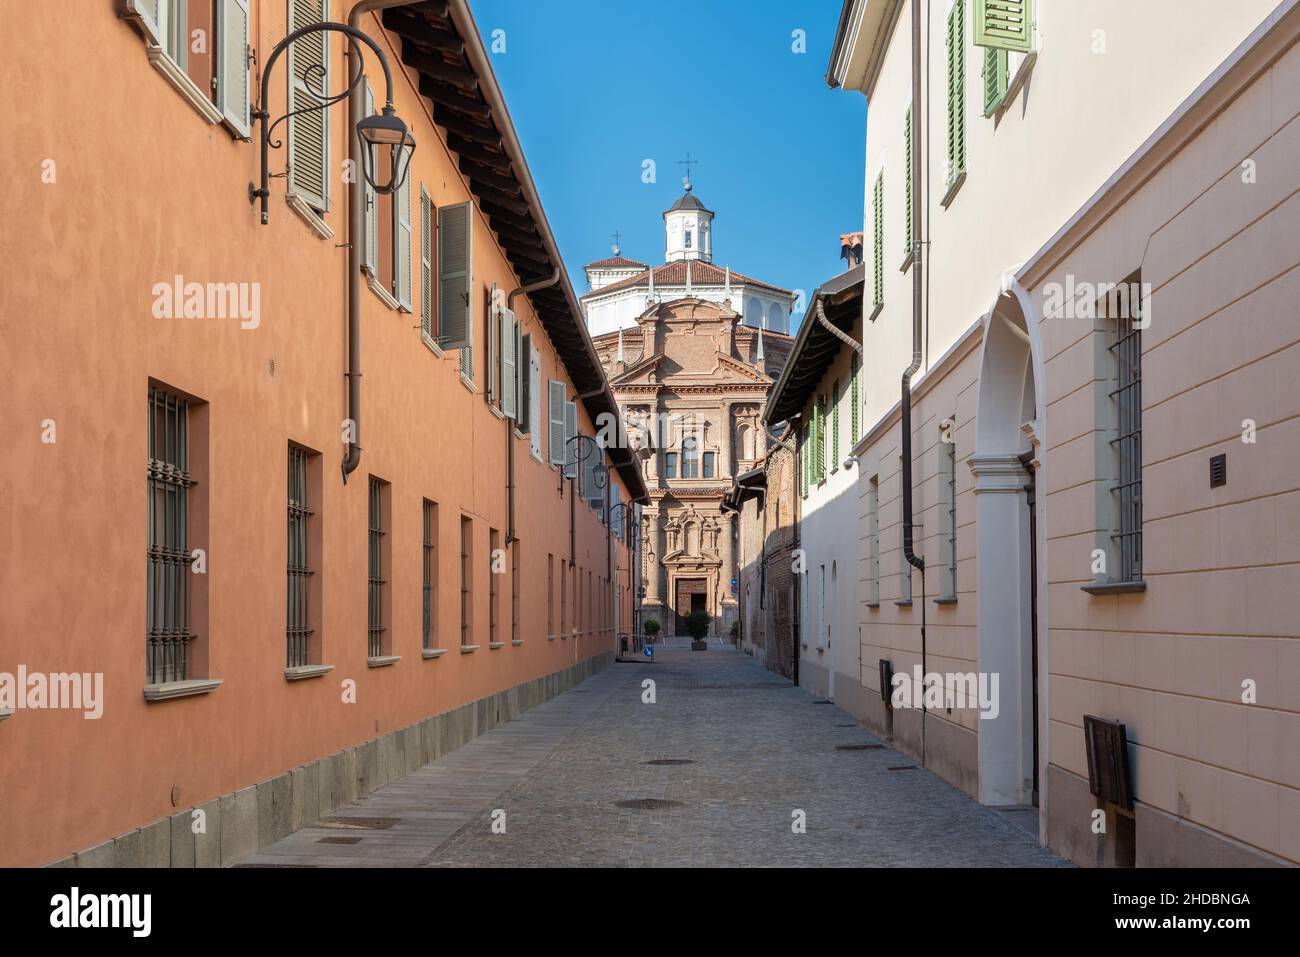 Cherasco, Cuneo, Italy - October 27, 2021: via dell'Ospedale with retirement home Ospedale degli Infermi, in the background Sanctuary of Our Lady of t Stock Photo